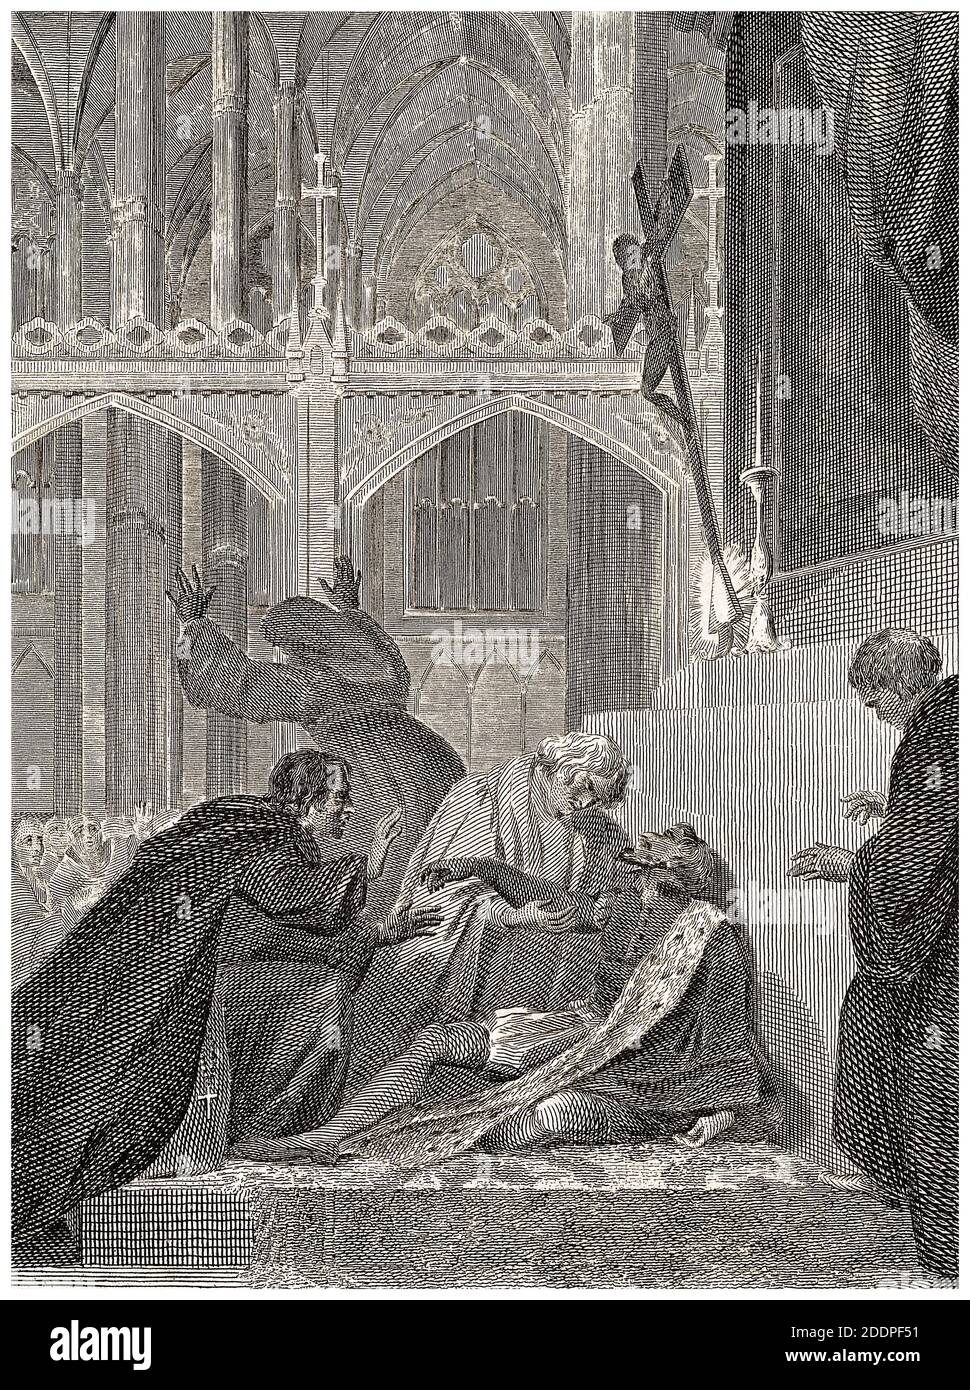 The Death of King Henry IV of England (1367-1413) on 20th March 1413, engraving by William Bromley after Robert Smirke, 1816 Stock Photo